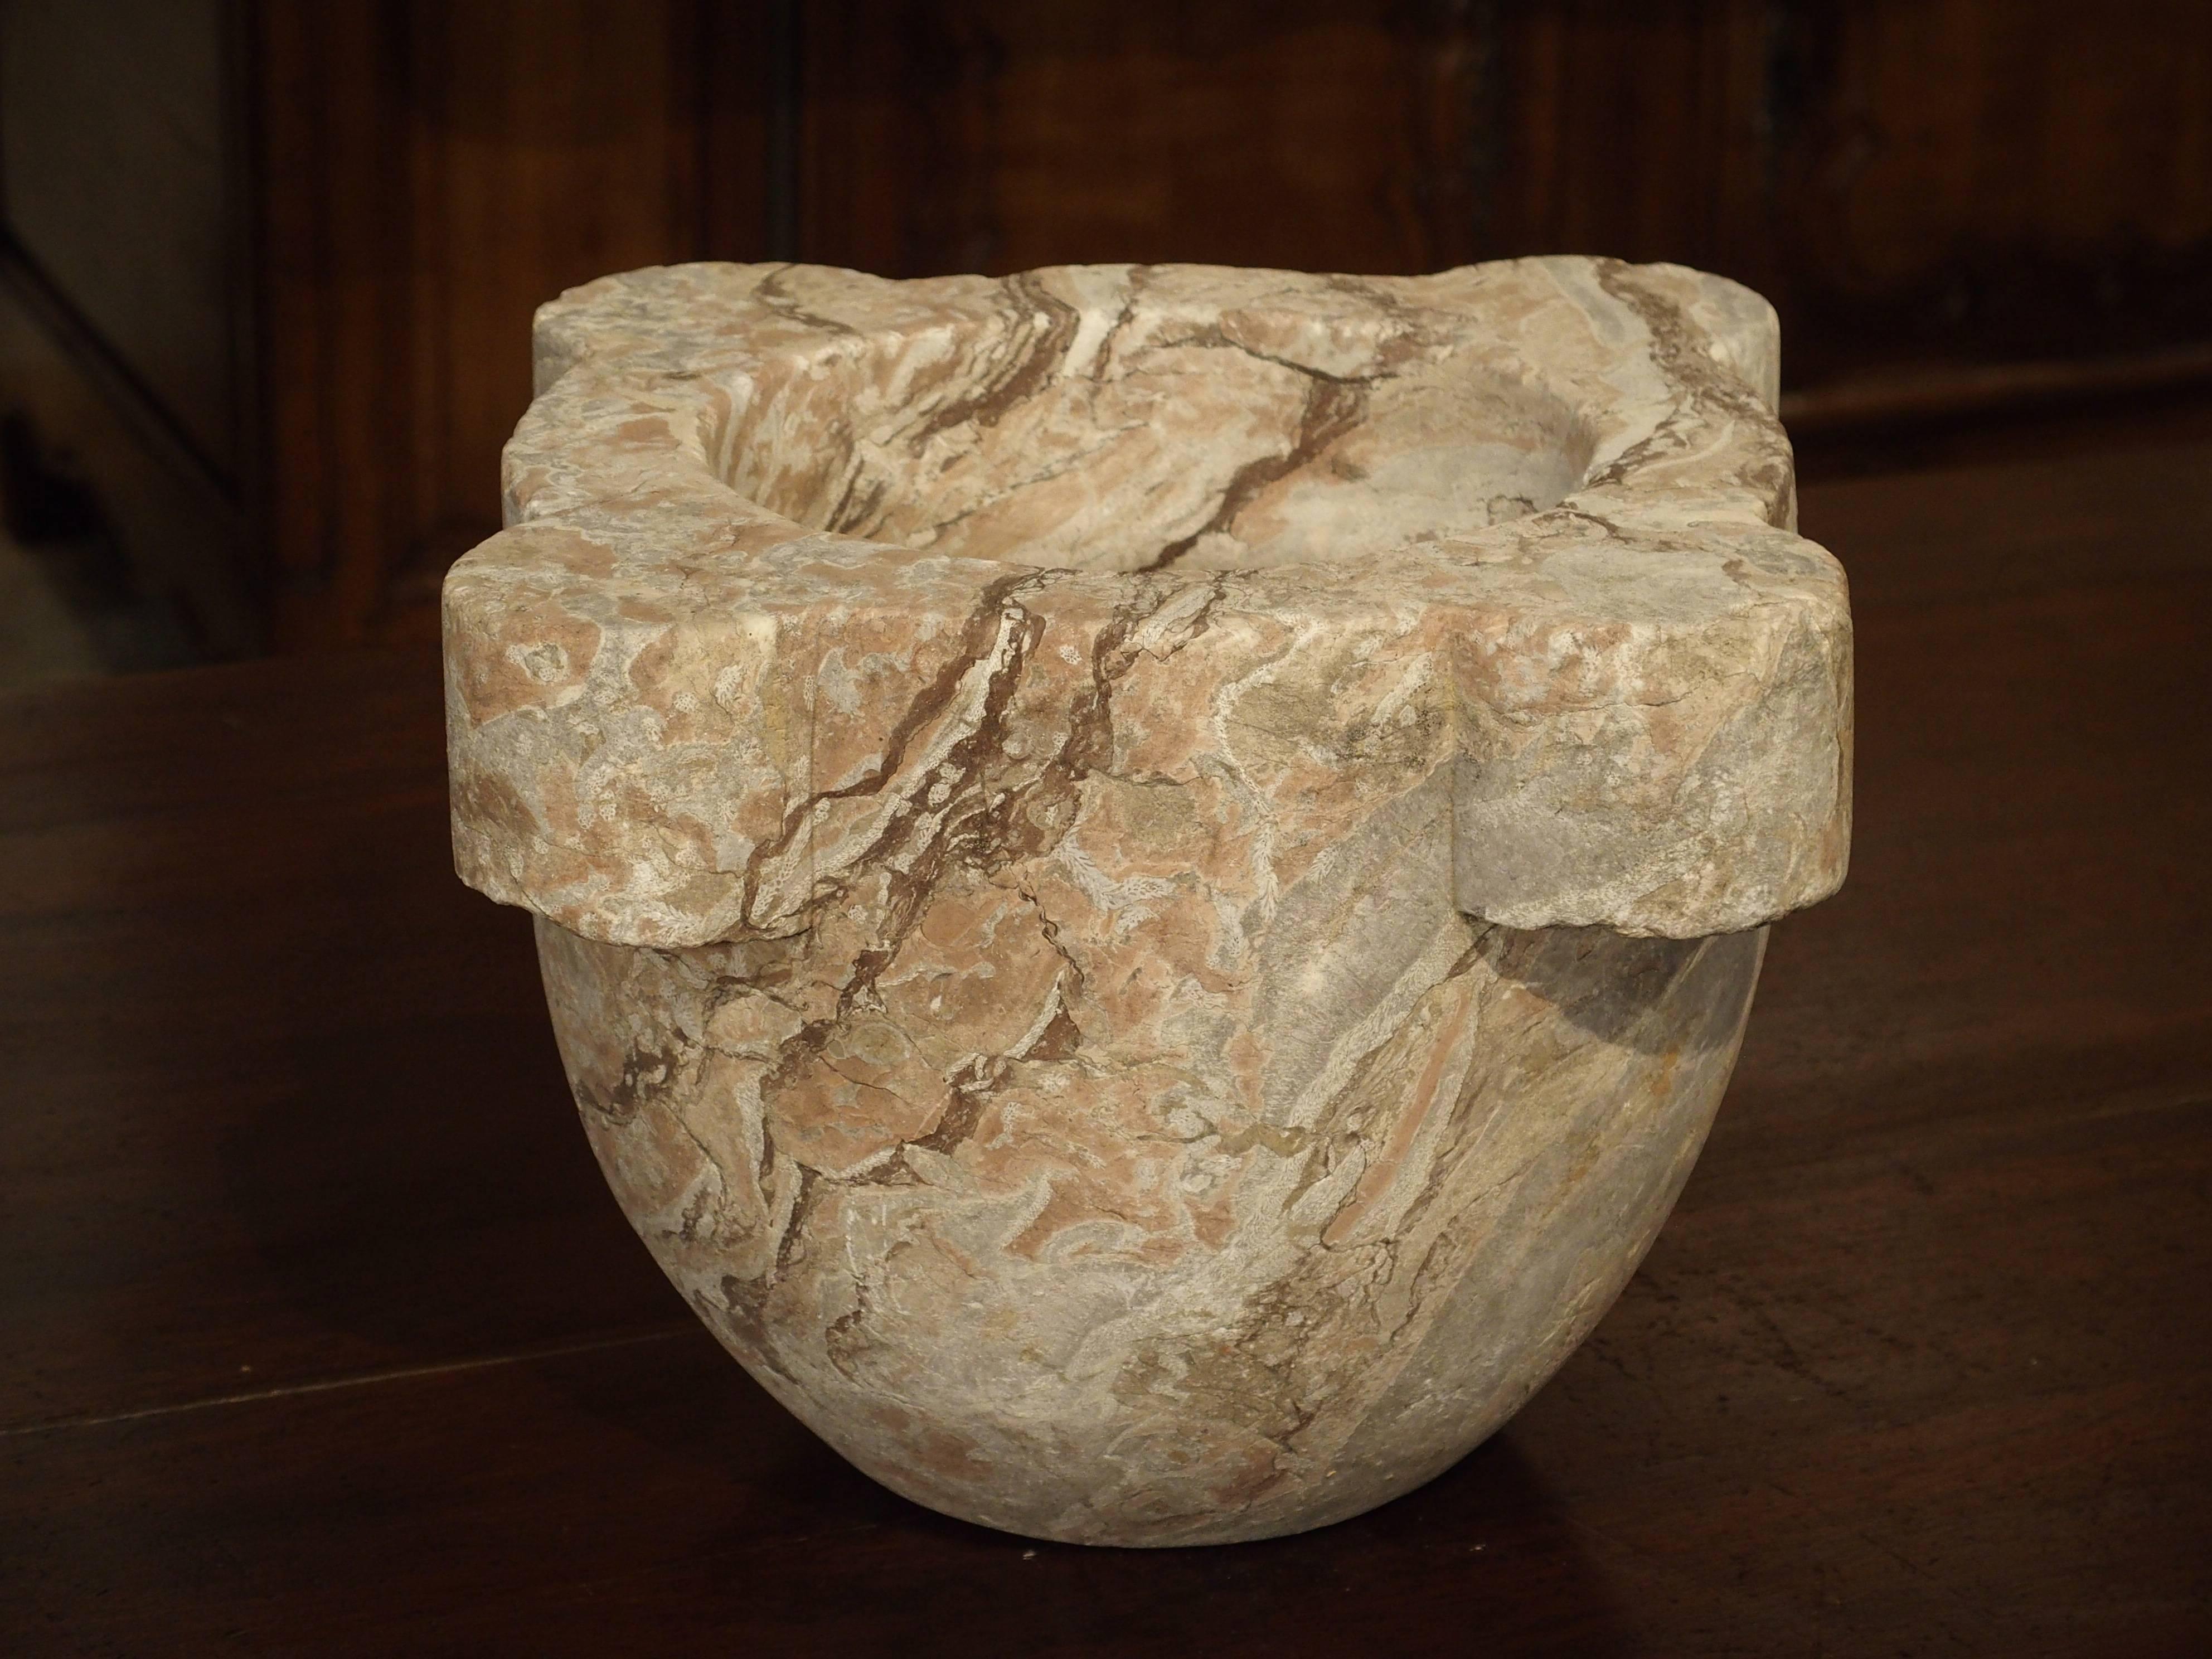 This large and beautiful marble mortar is from France and dates to the 19th century. It is made from an antique rose, cream, and gray colored marble and has four out turned motifs. In France, these were used in the kitchens of grand chateaux. They